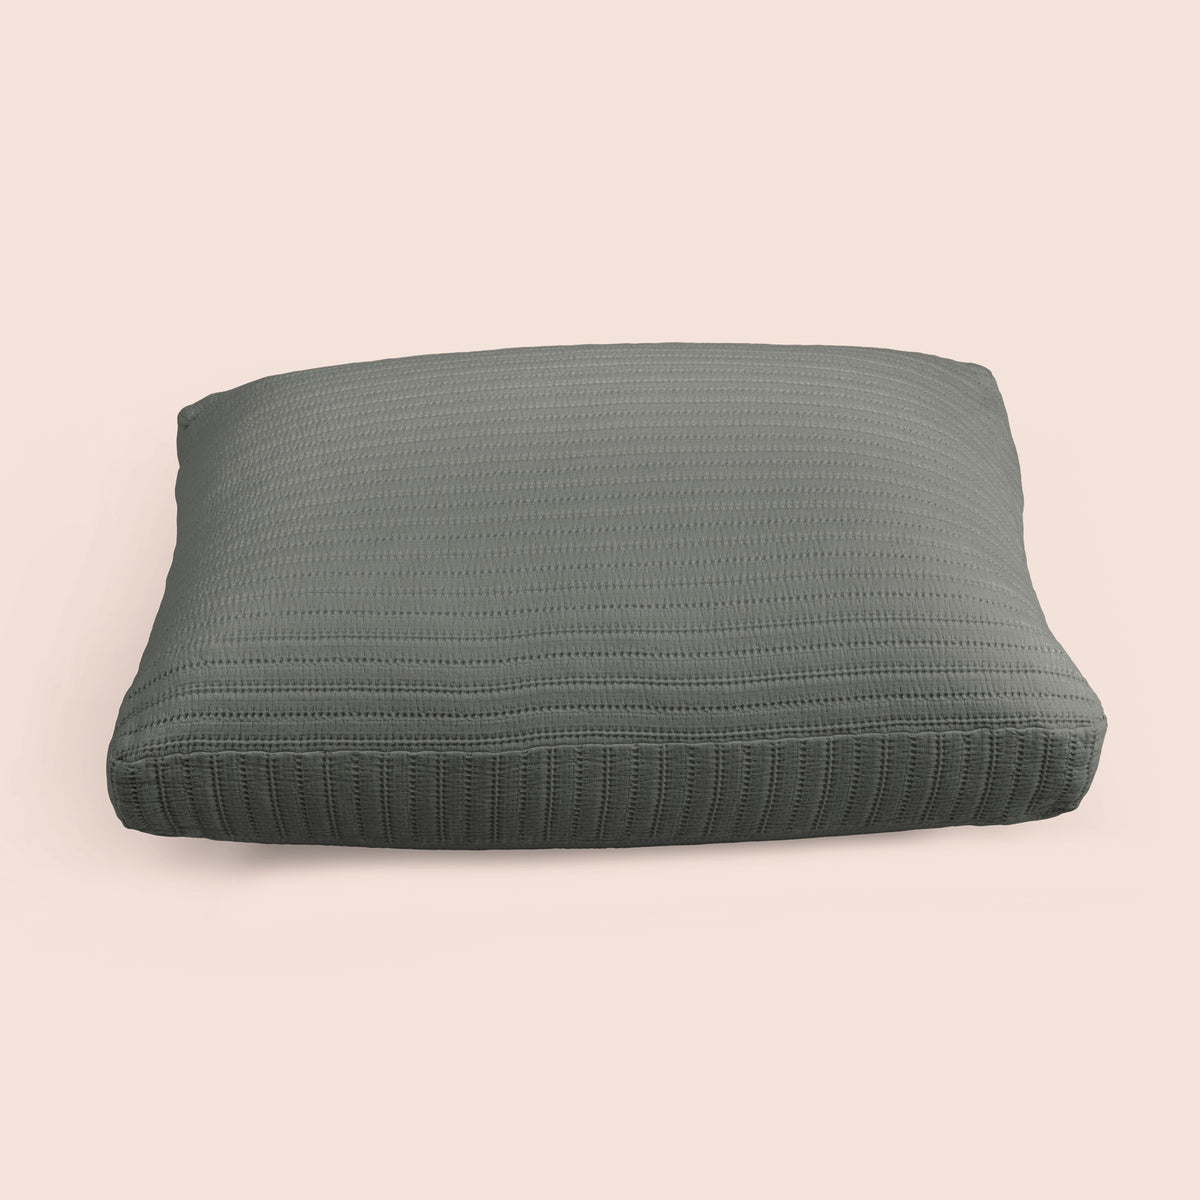 Image of the Agave Ridgeback Meditation Cushion Cover on a meditation cushion with a light pink background